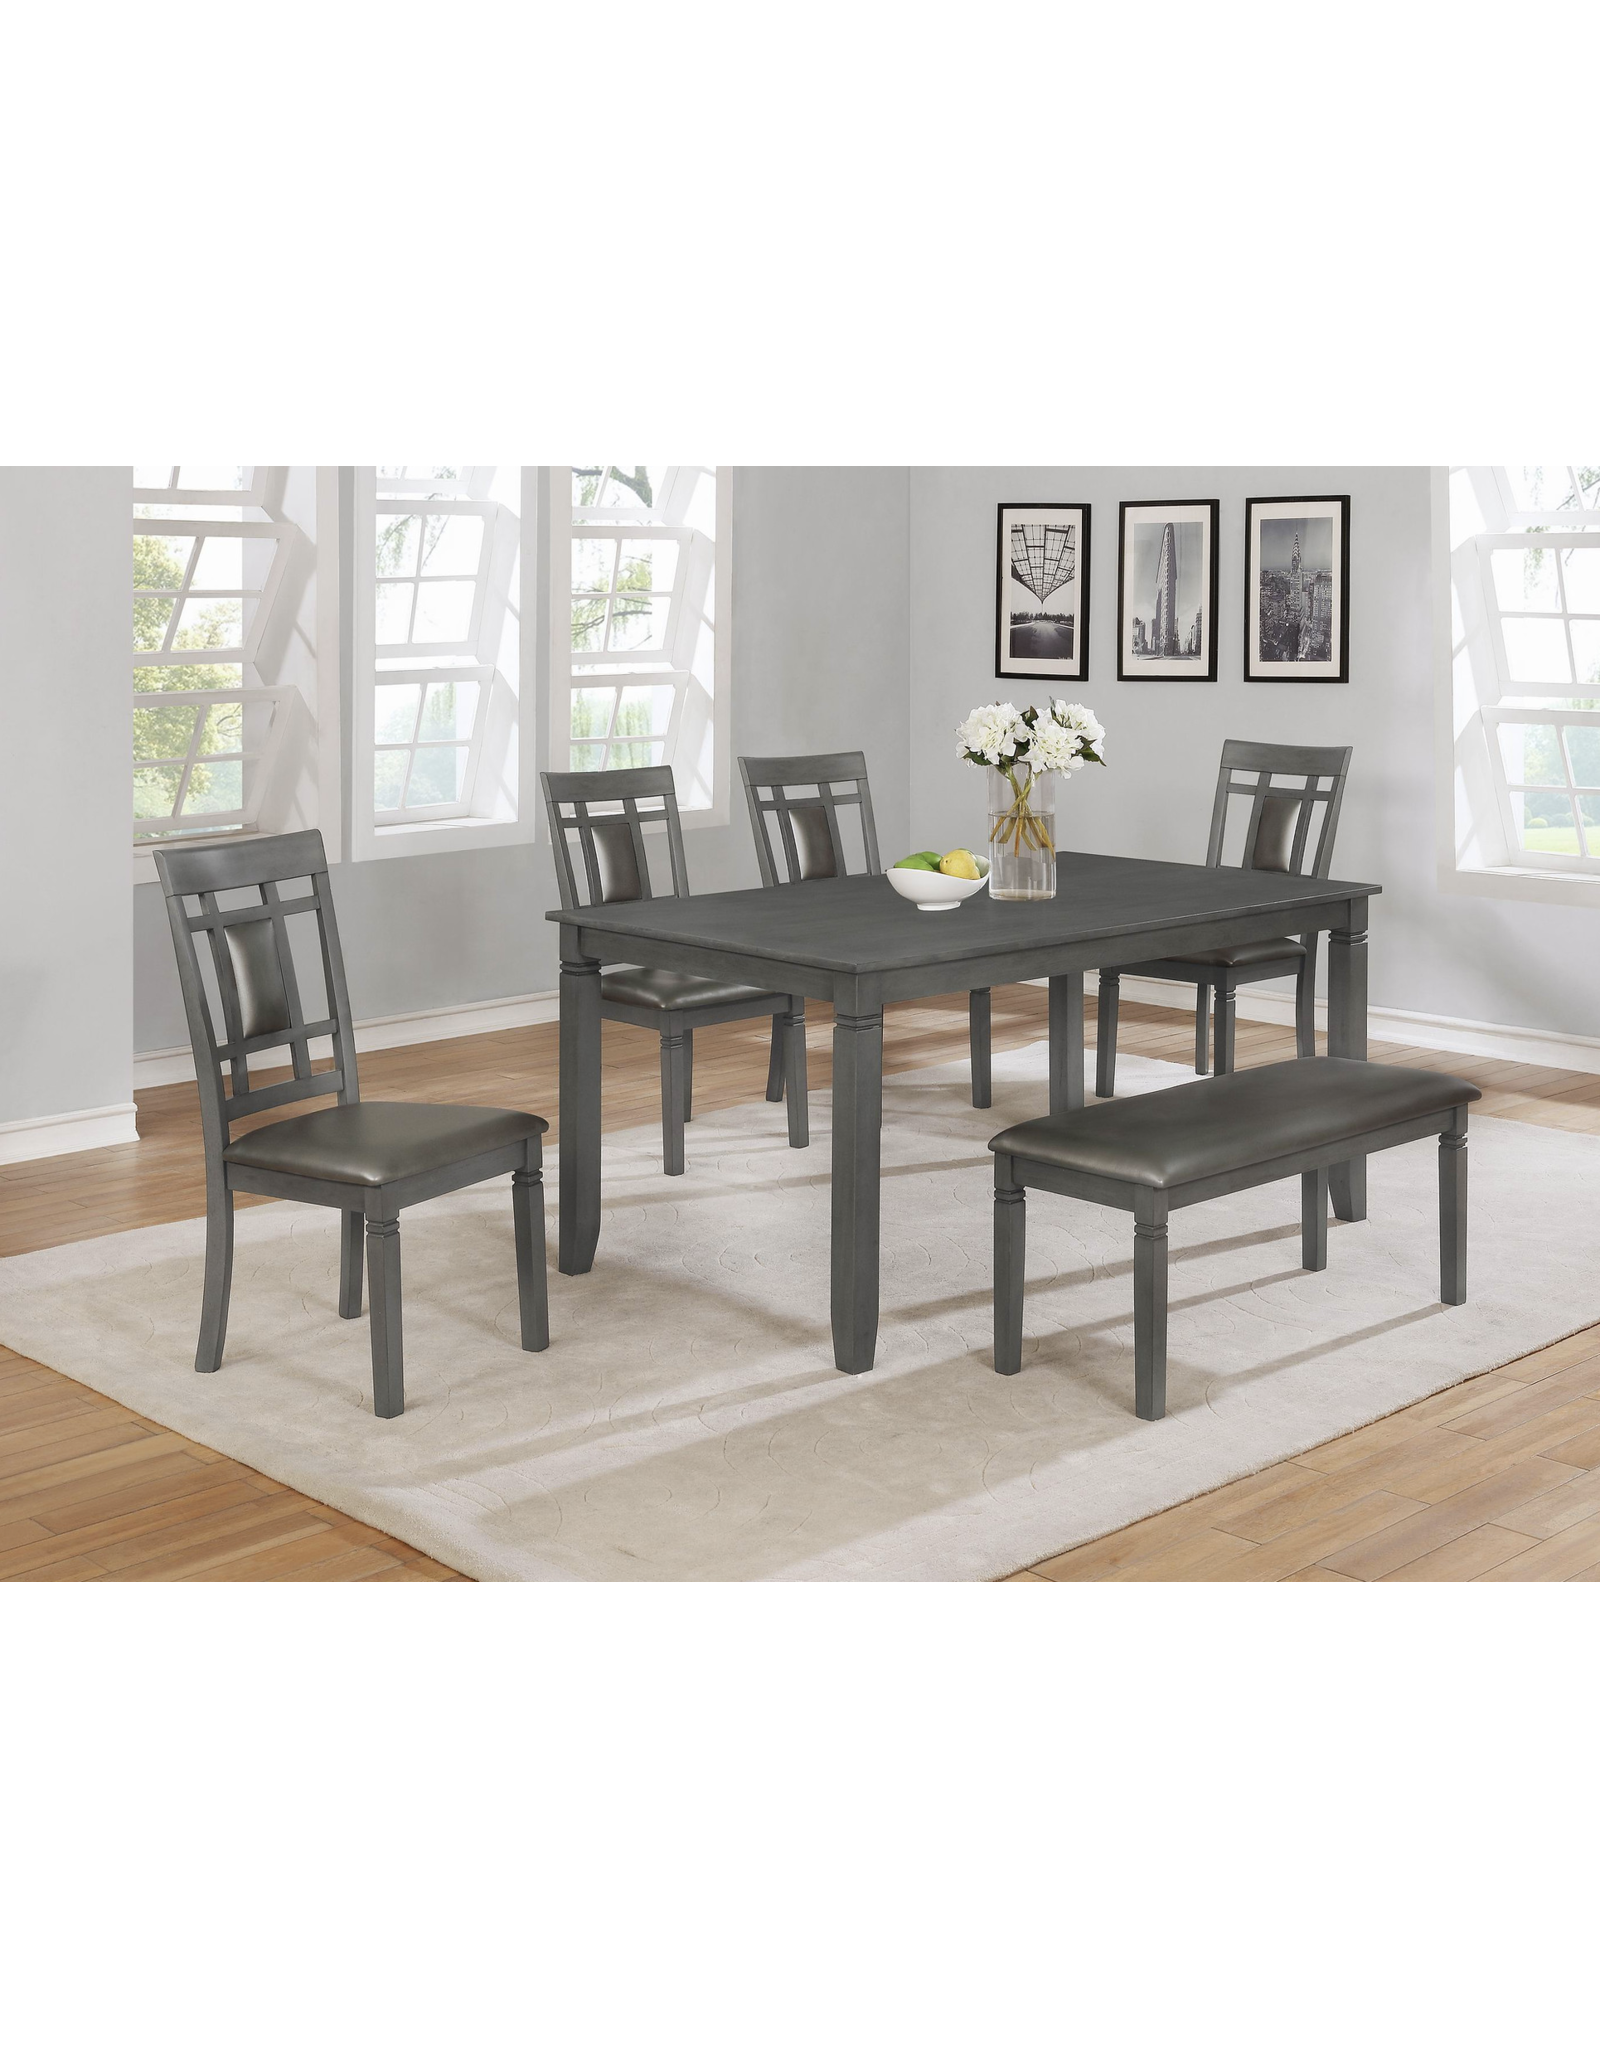 D209-6 Franklin Table & 4 chairs w/ Bench